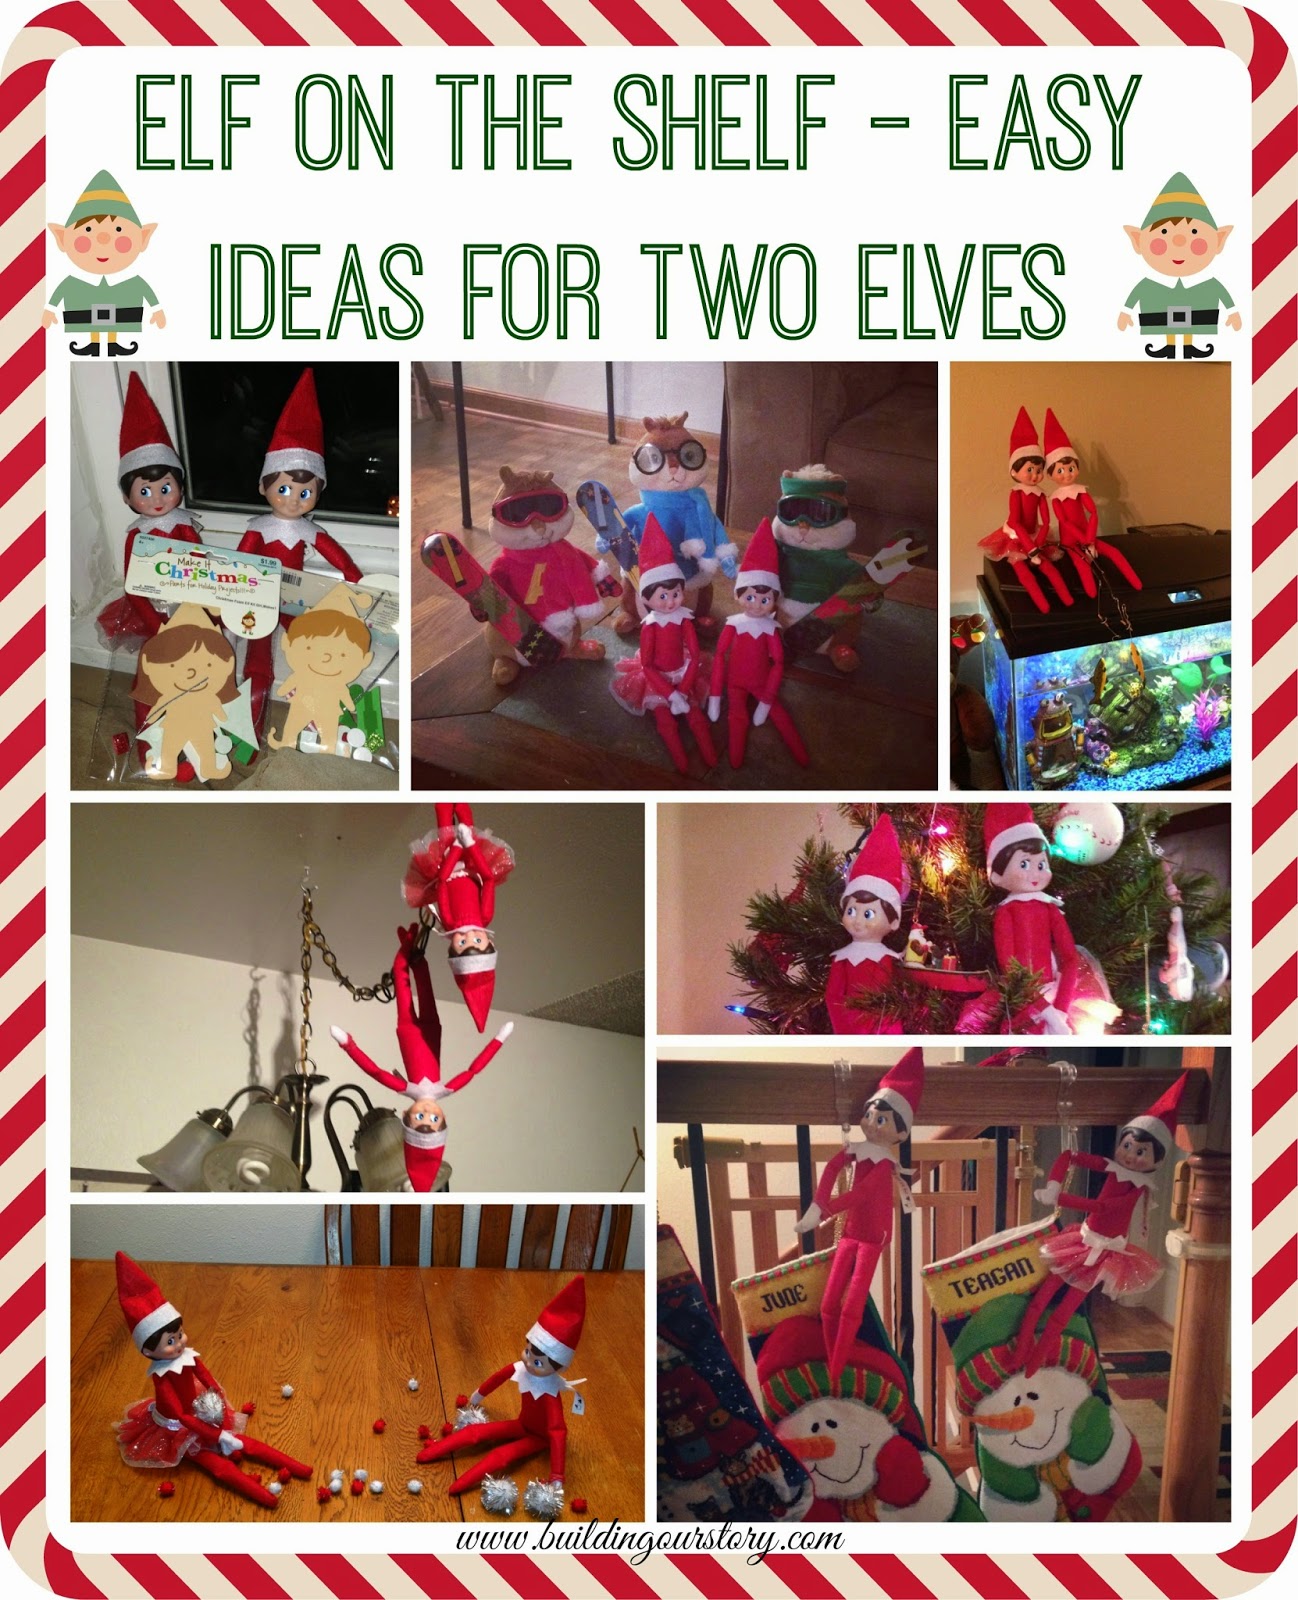 Elf on the Shelf - Easy Ideas For Two Elves |Building Our Story